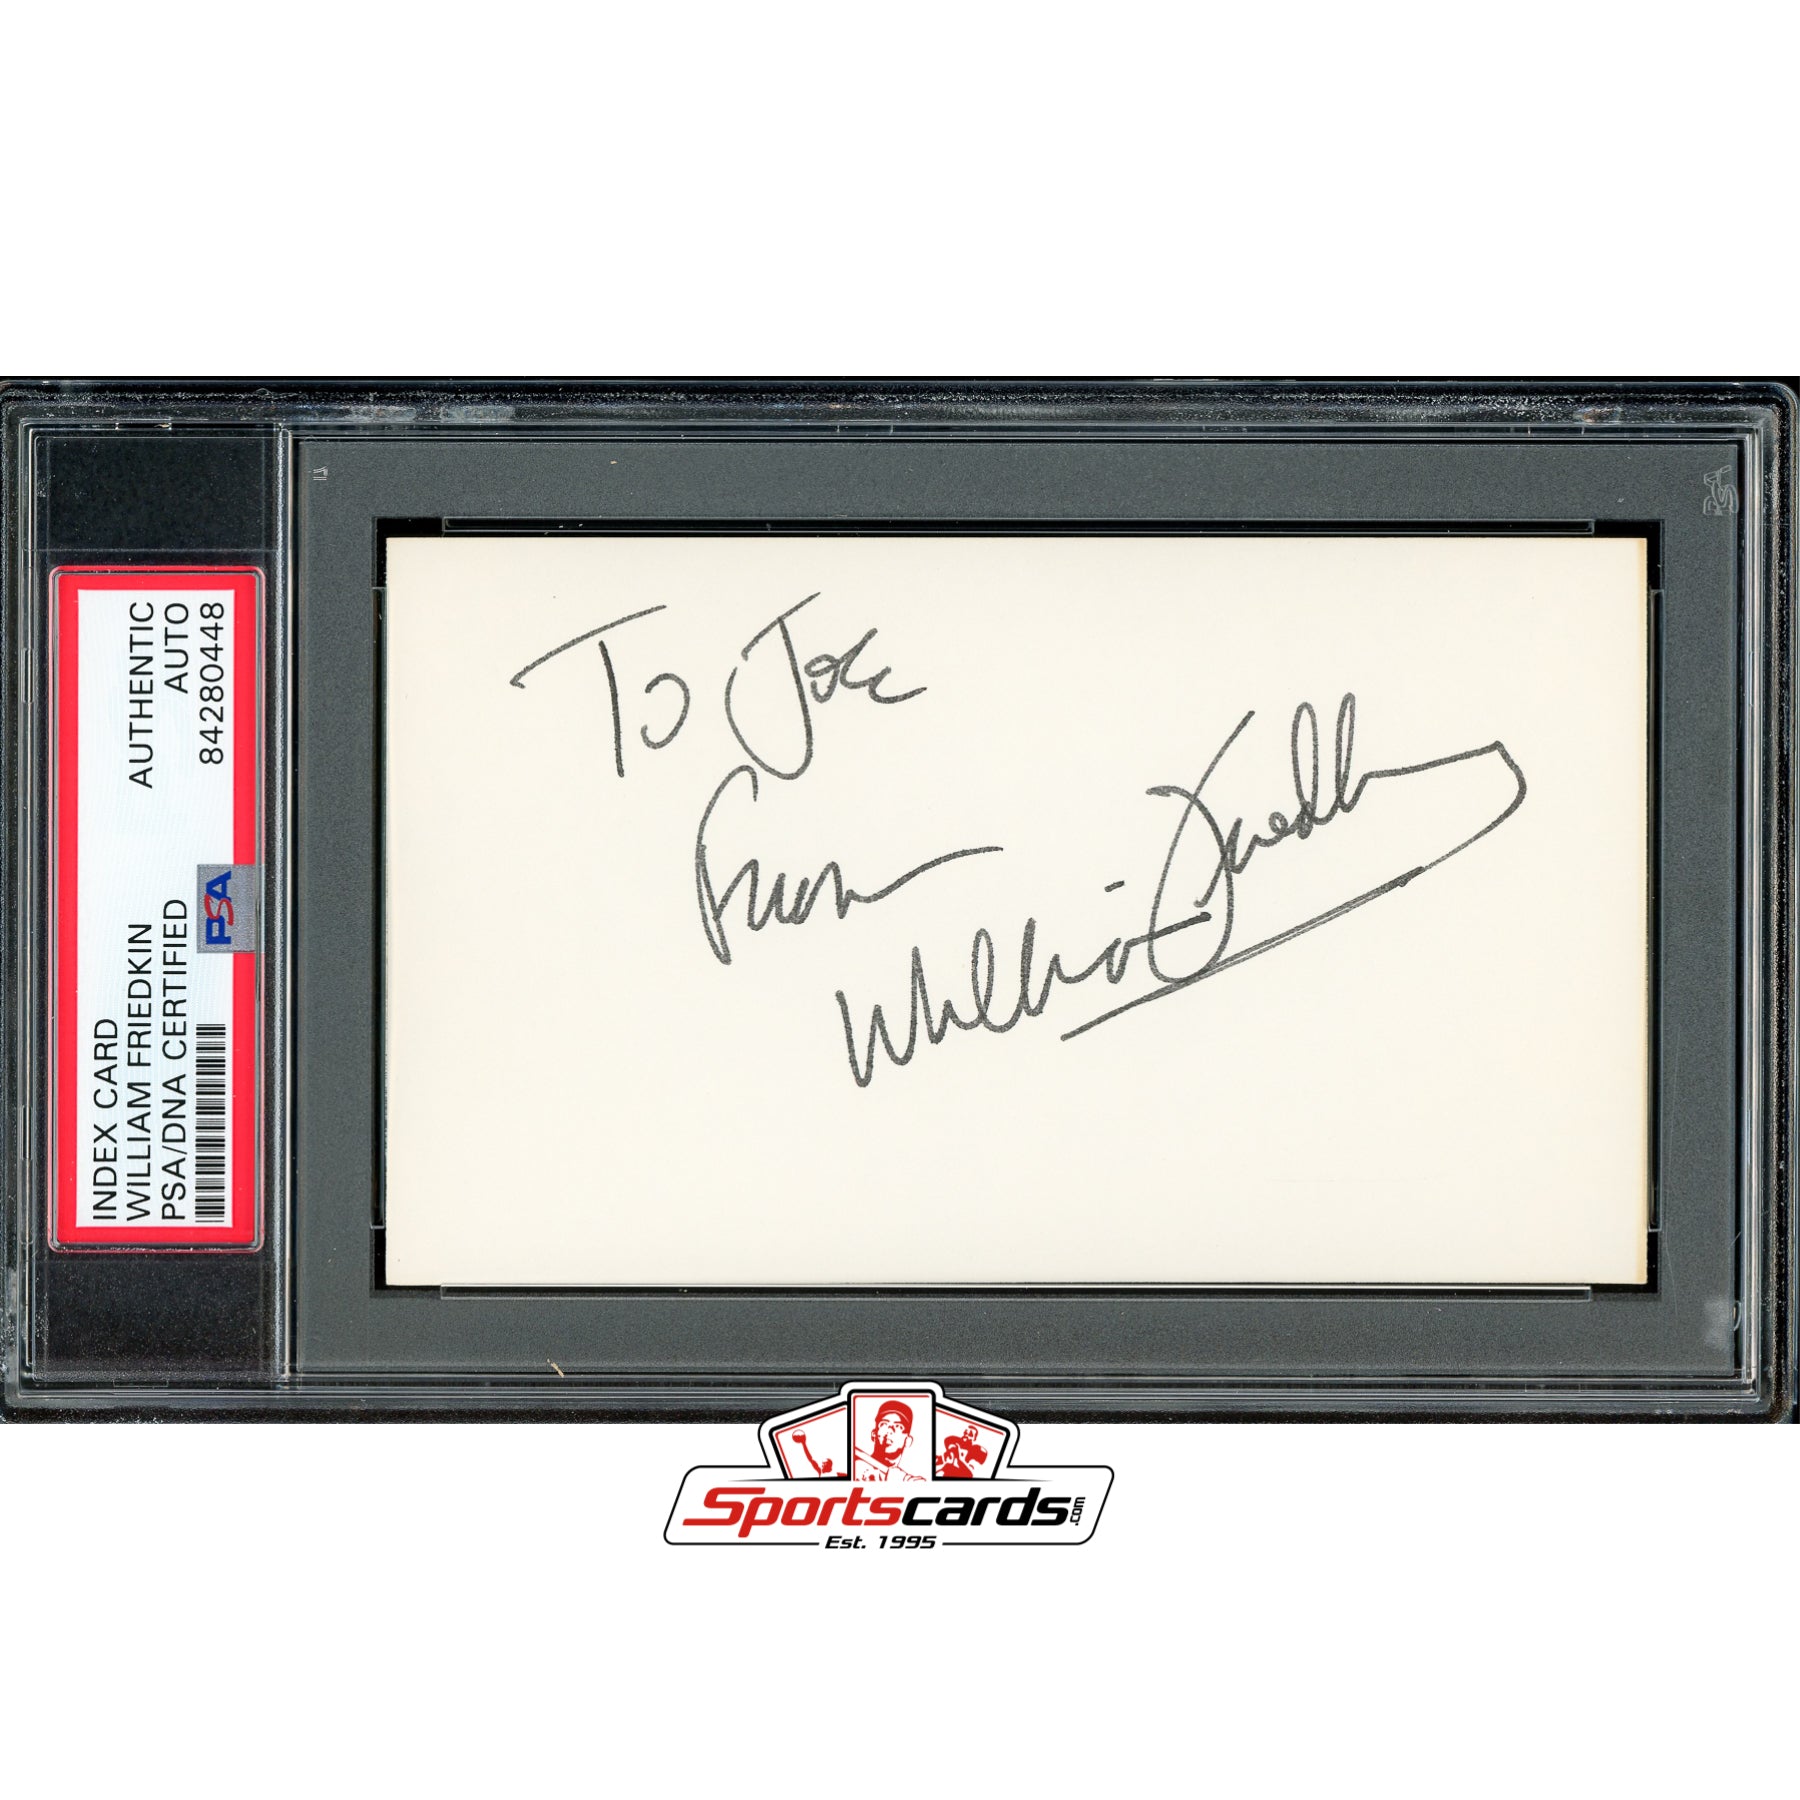 Director William Friedkin Signed 3x5 Index Card Autograph PSA/DNA